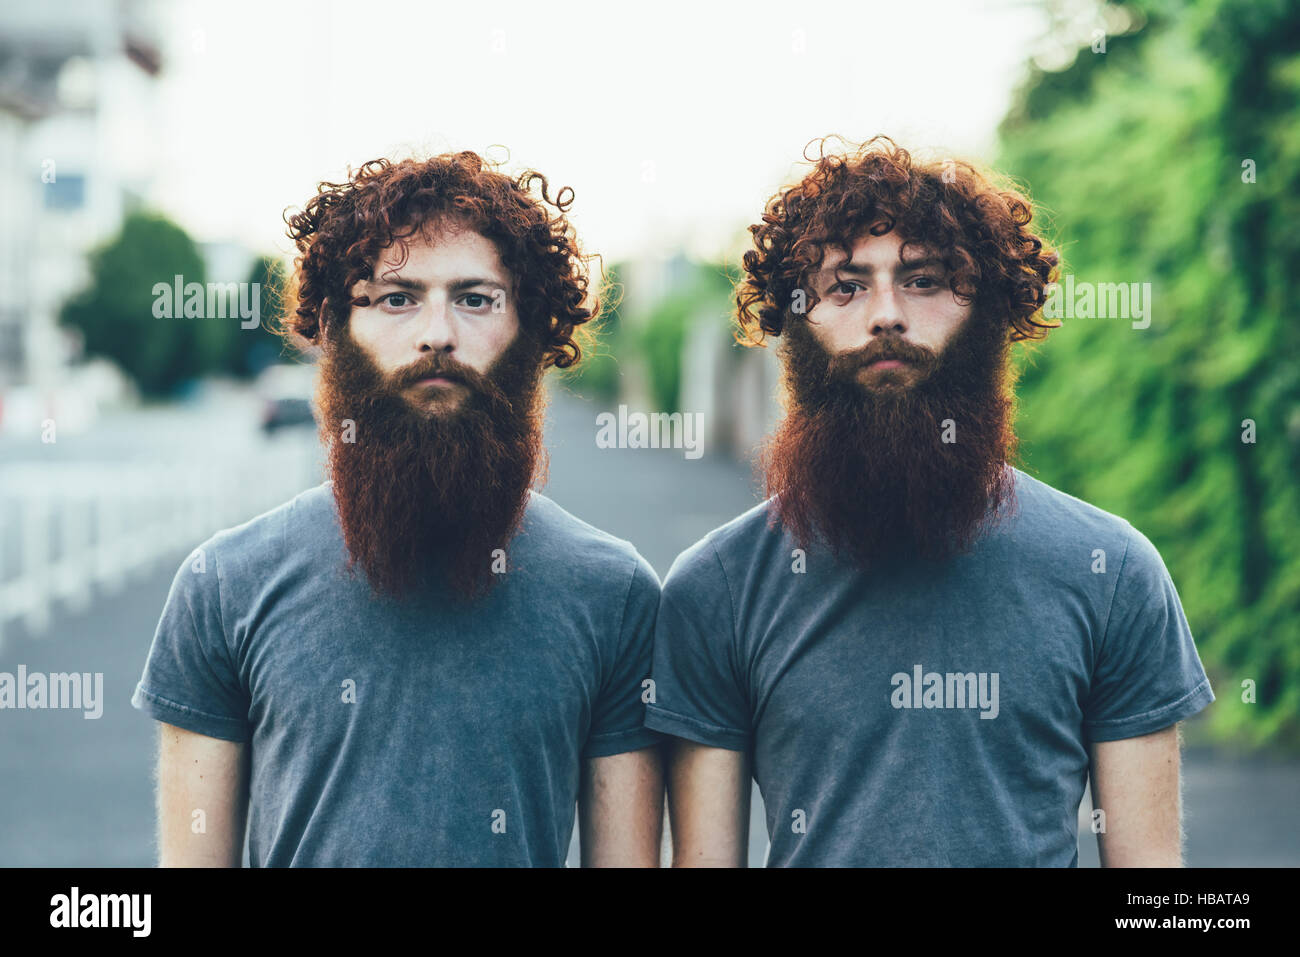 Portrait of identical adult male twins with red hair and beards on sidewalk Stock Photo